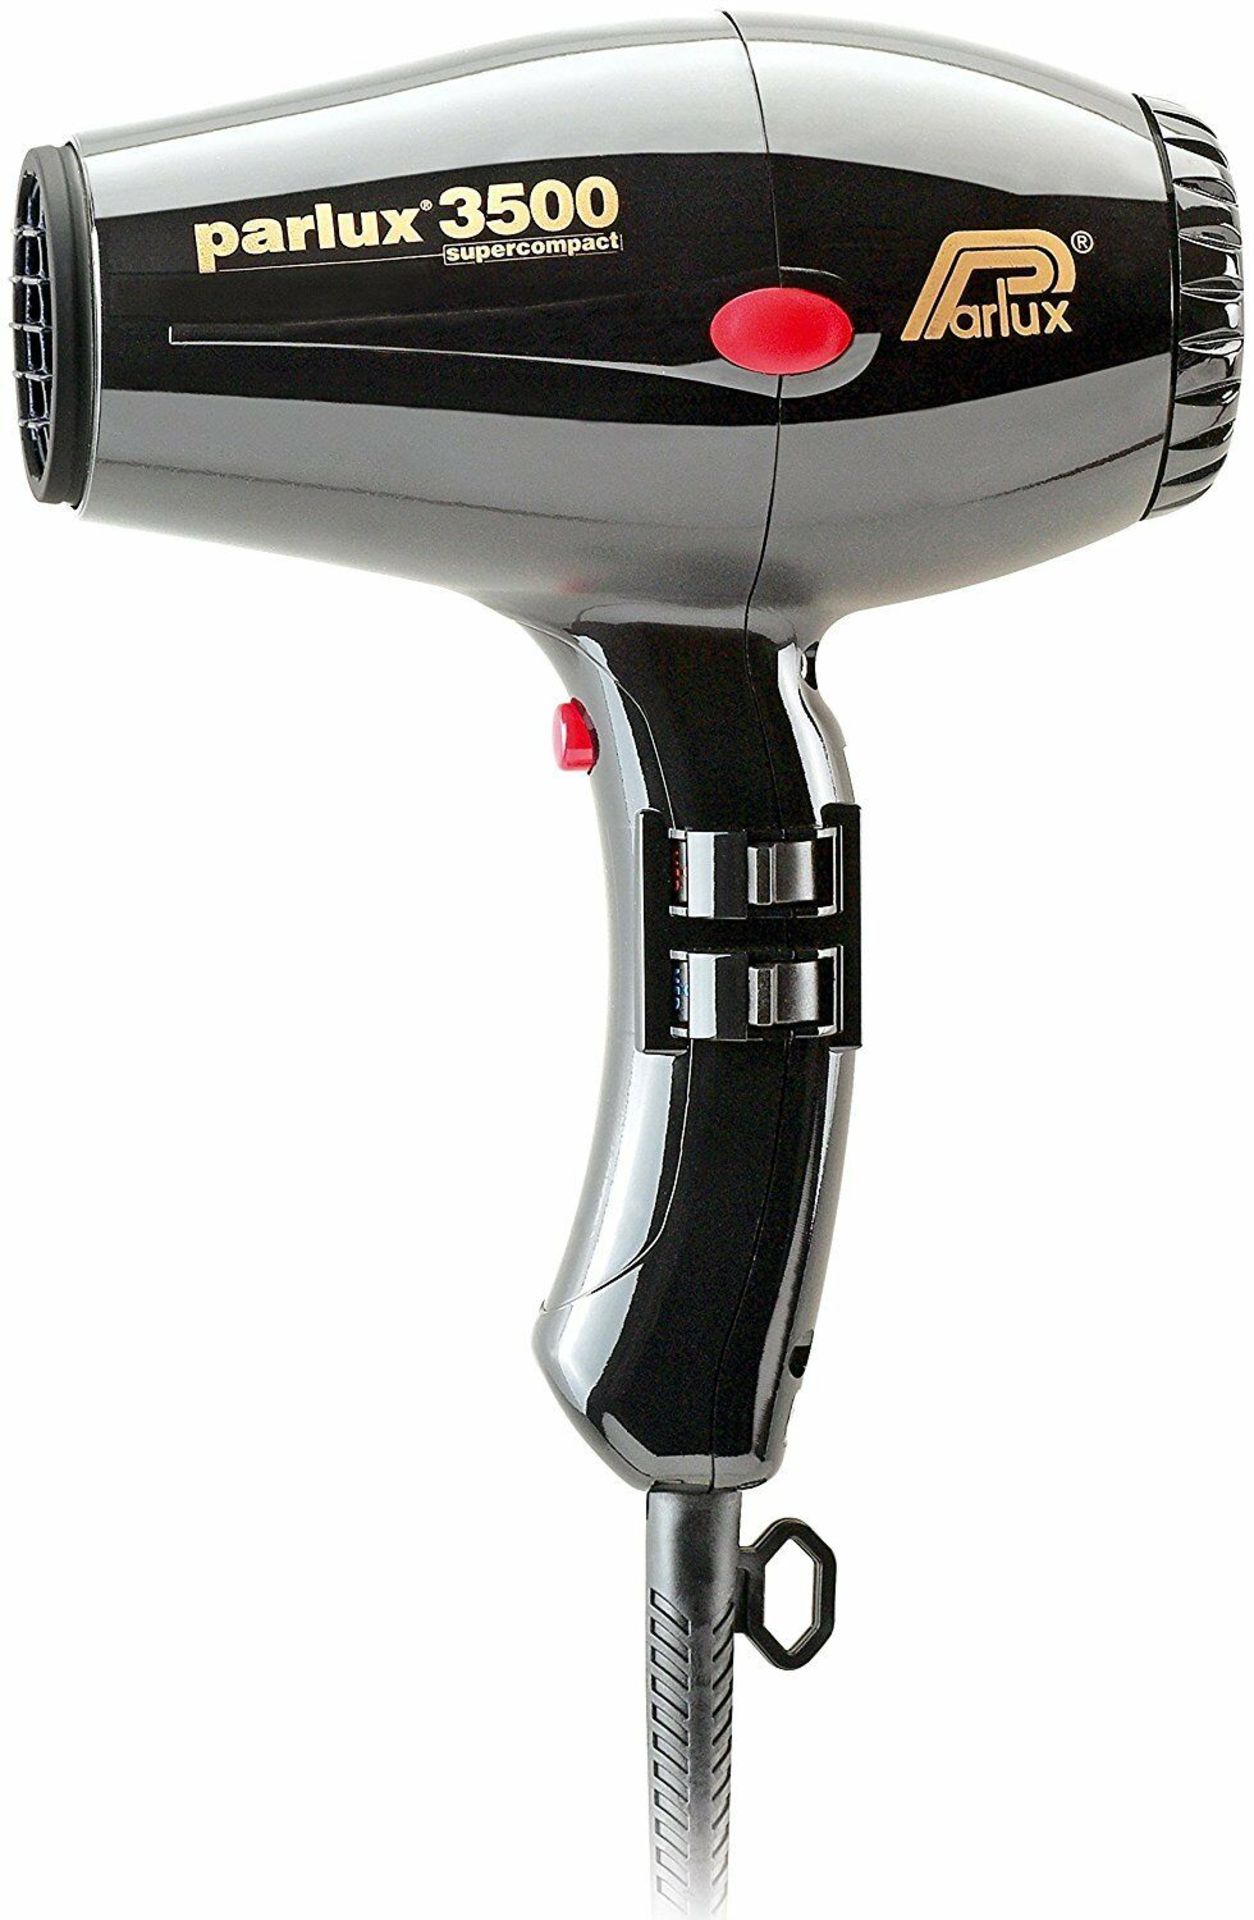 Parlux 3500 Supercompact Professional Hairdryer RRP £249 - Ex Demo or Surplus Stock from Private...